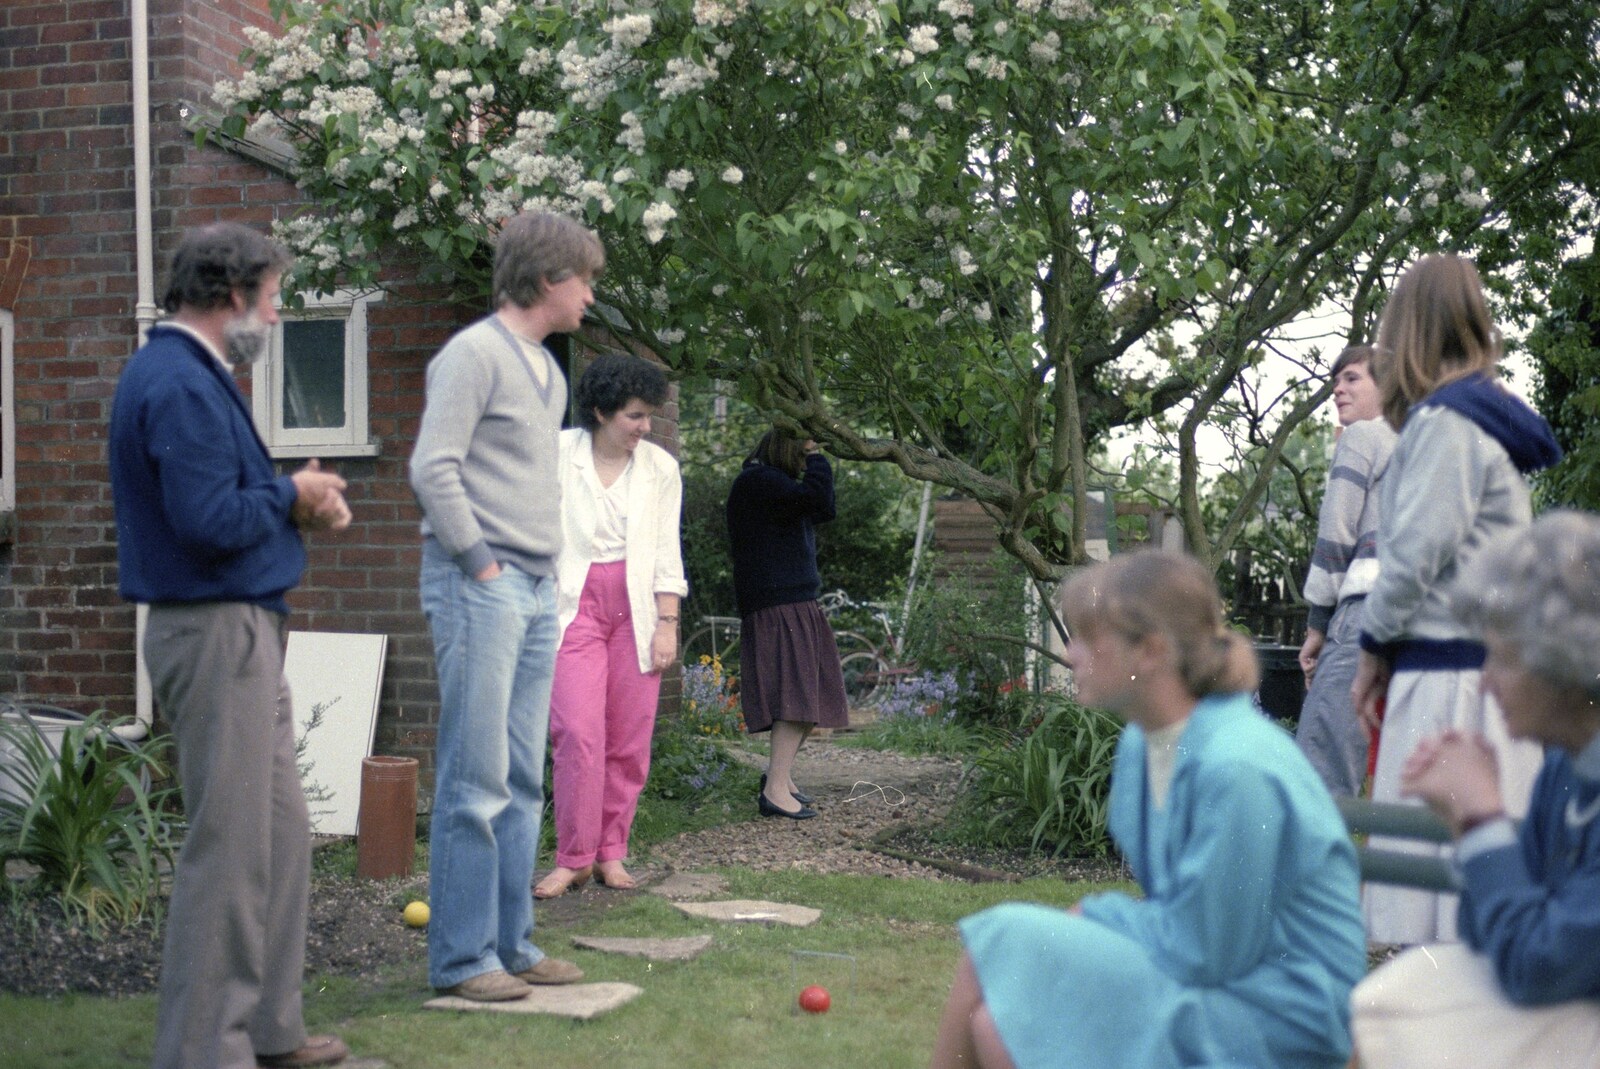 Nosher's 18th Birthday, Barton on Sea, Hampshire - 26th May 1985: People mill around playing croquet